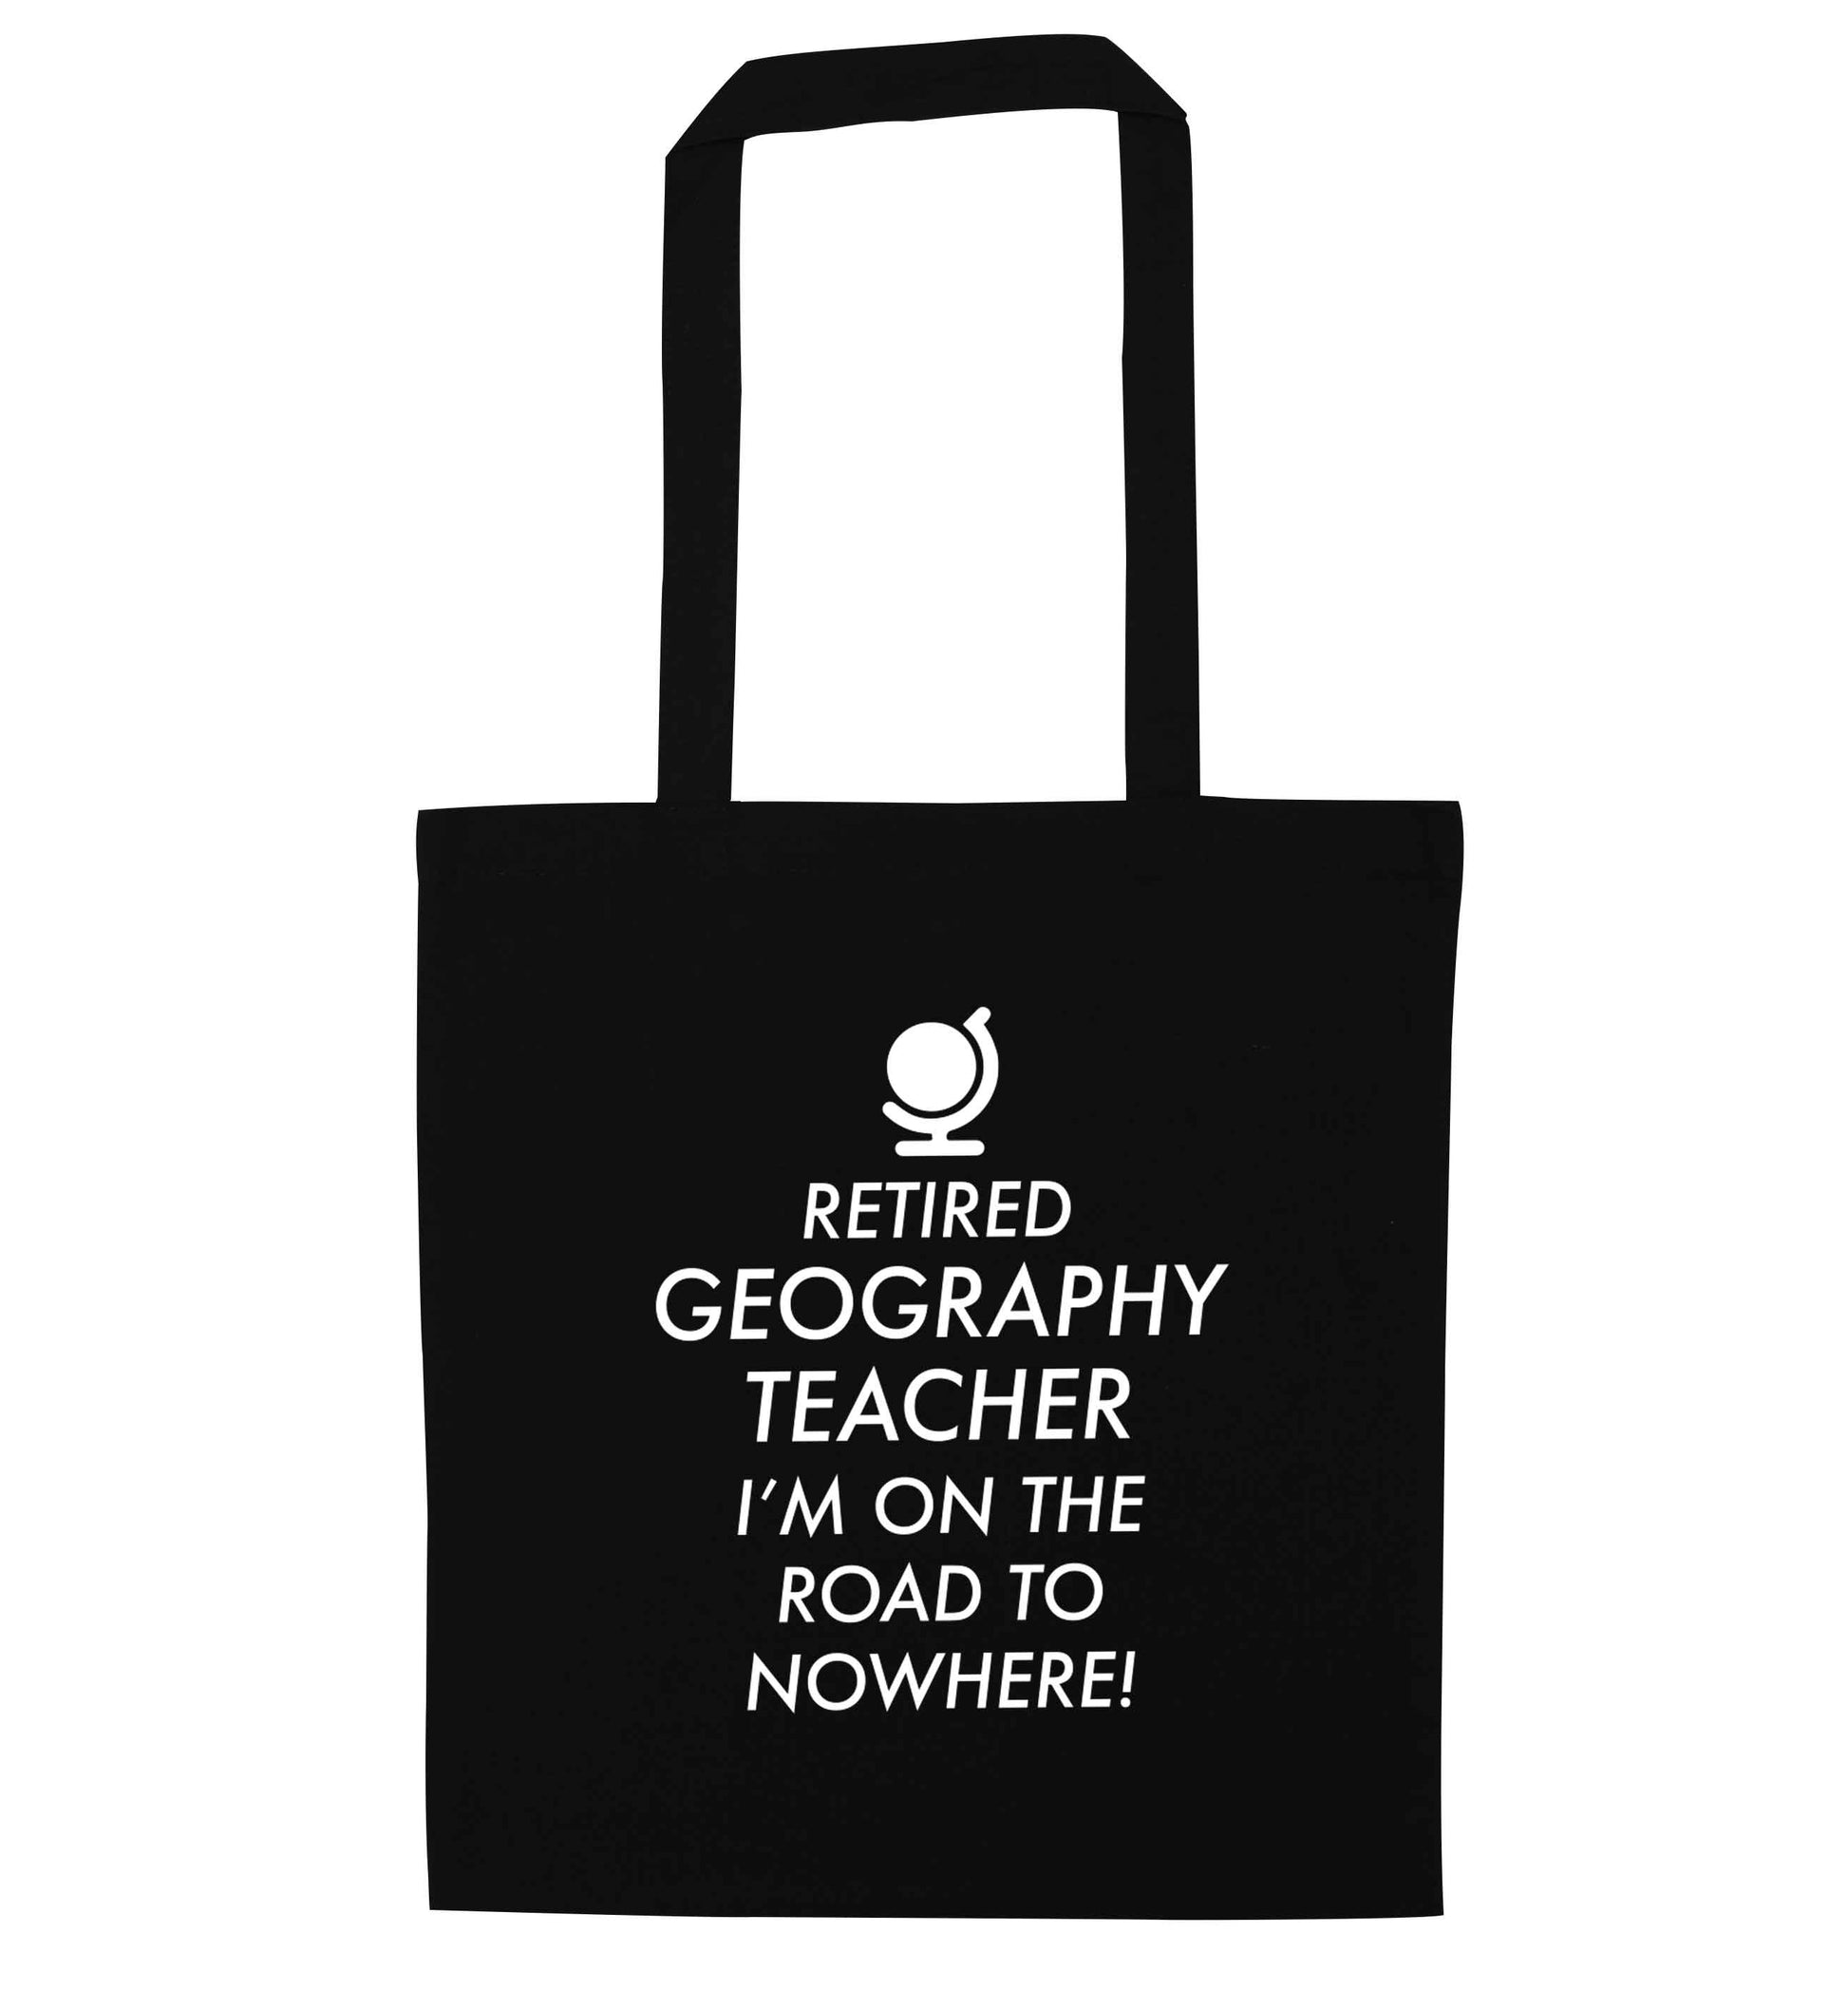 Retired geography teacher I'm on the road to nowhere black tote bag